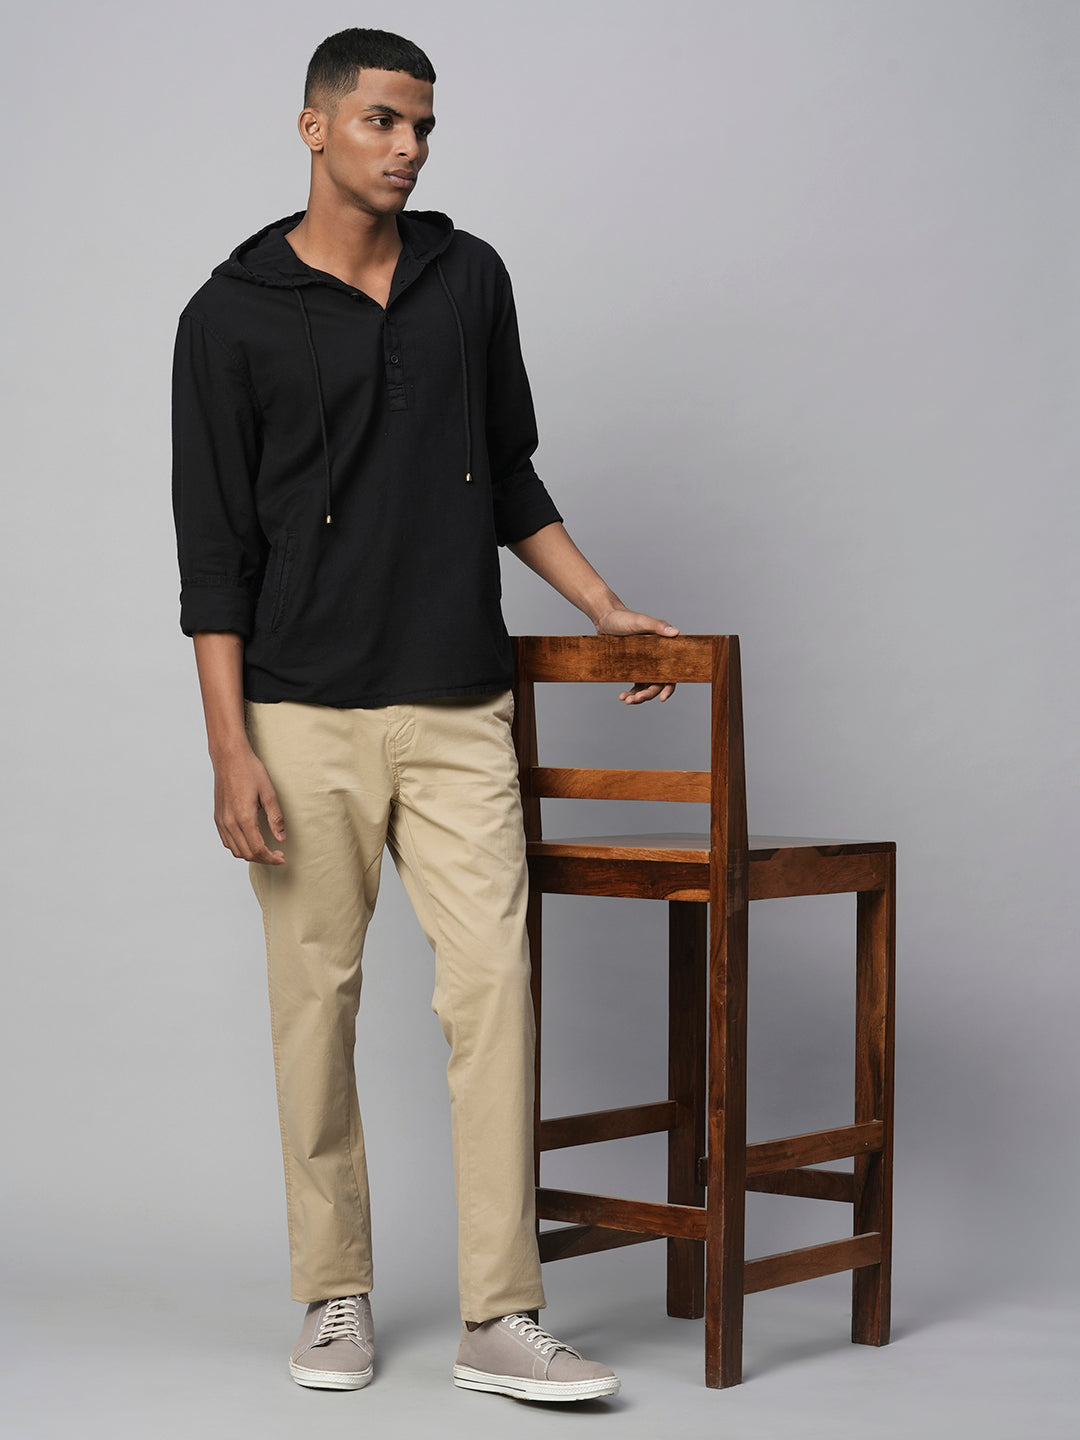 Pulling Off A T-Shirt With Dress Pants: It's Possible | He Spoke Style